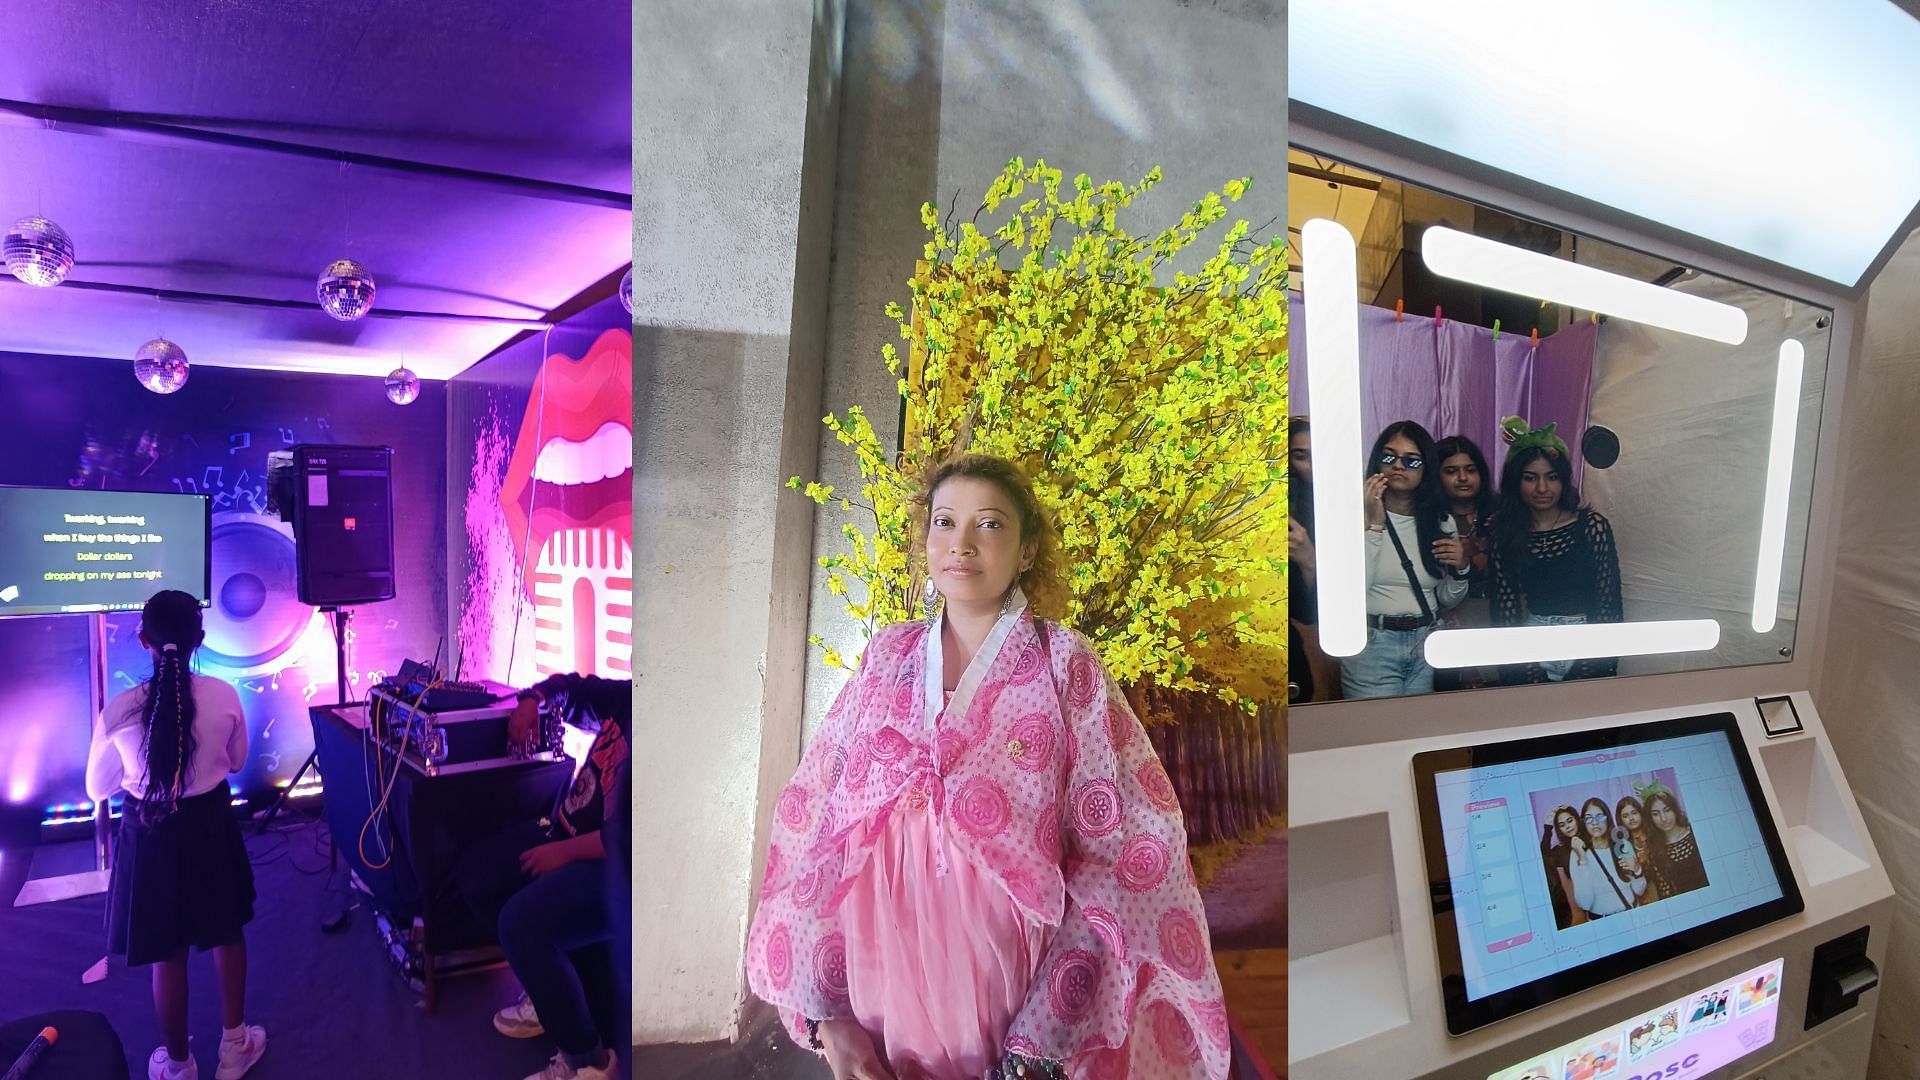 Karaoke session, Hanbok, and Photo booth at the K-Town Festival (Images via Sportskeeda)